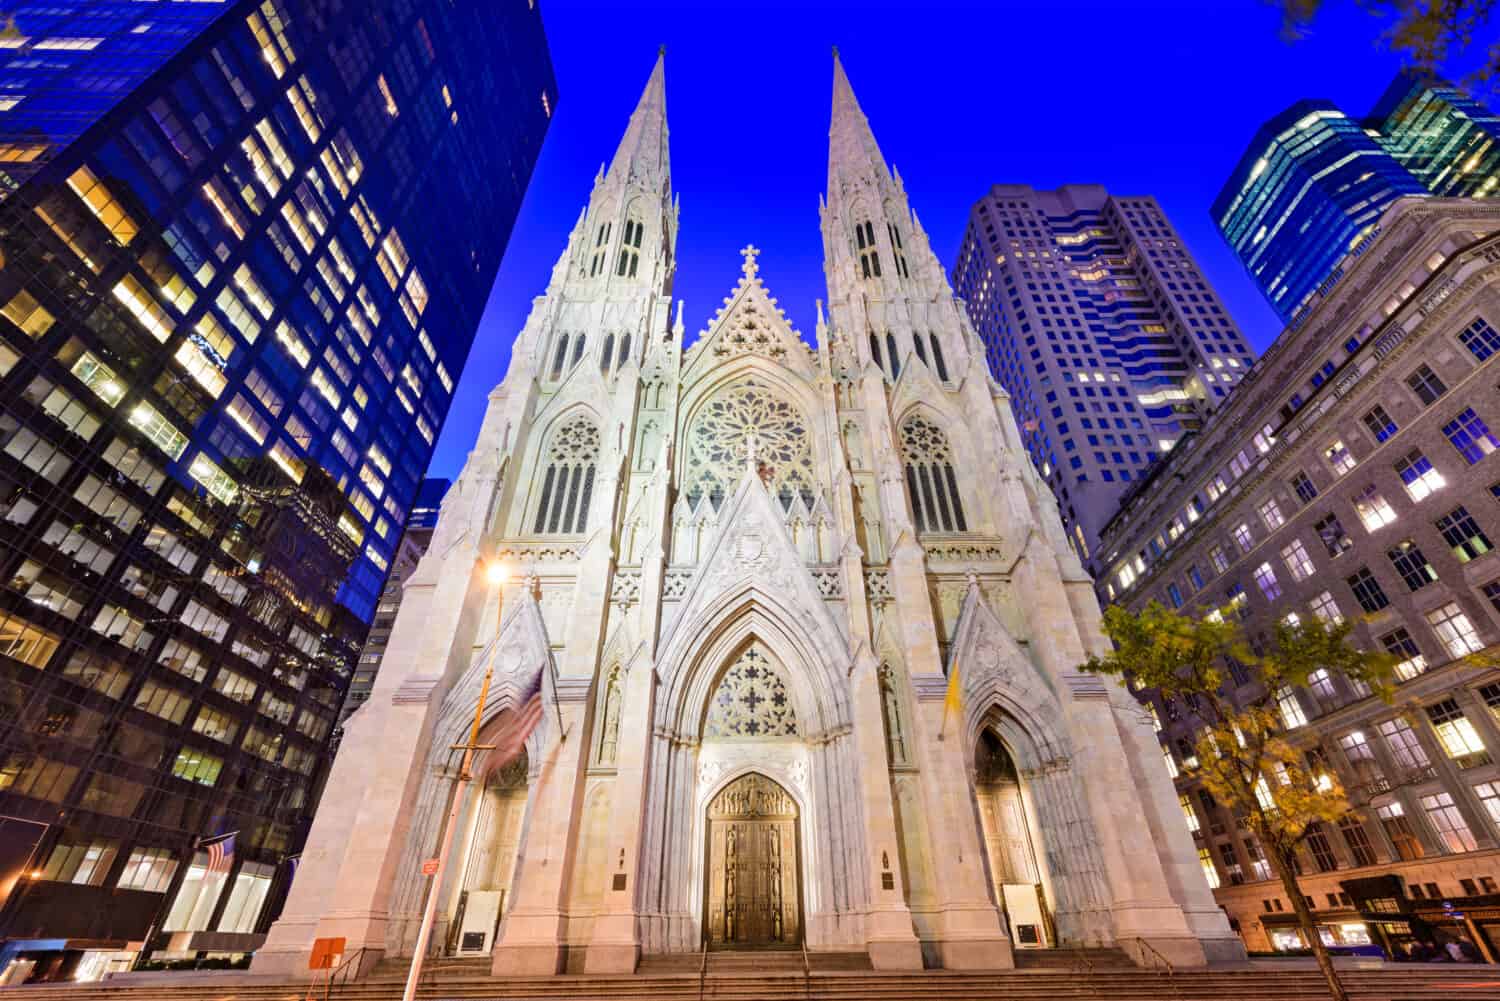 St. Patrick's Cathedral in New York City.